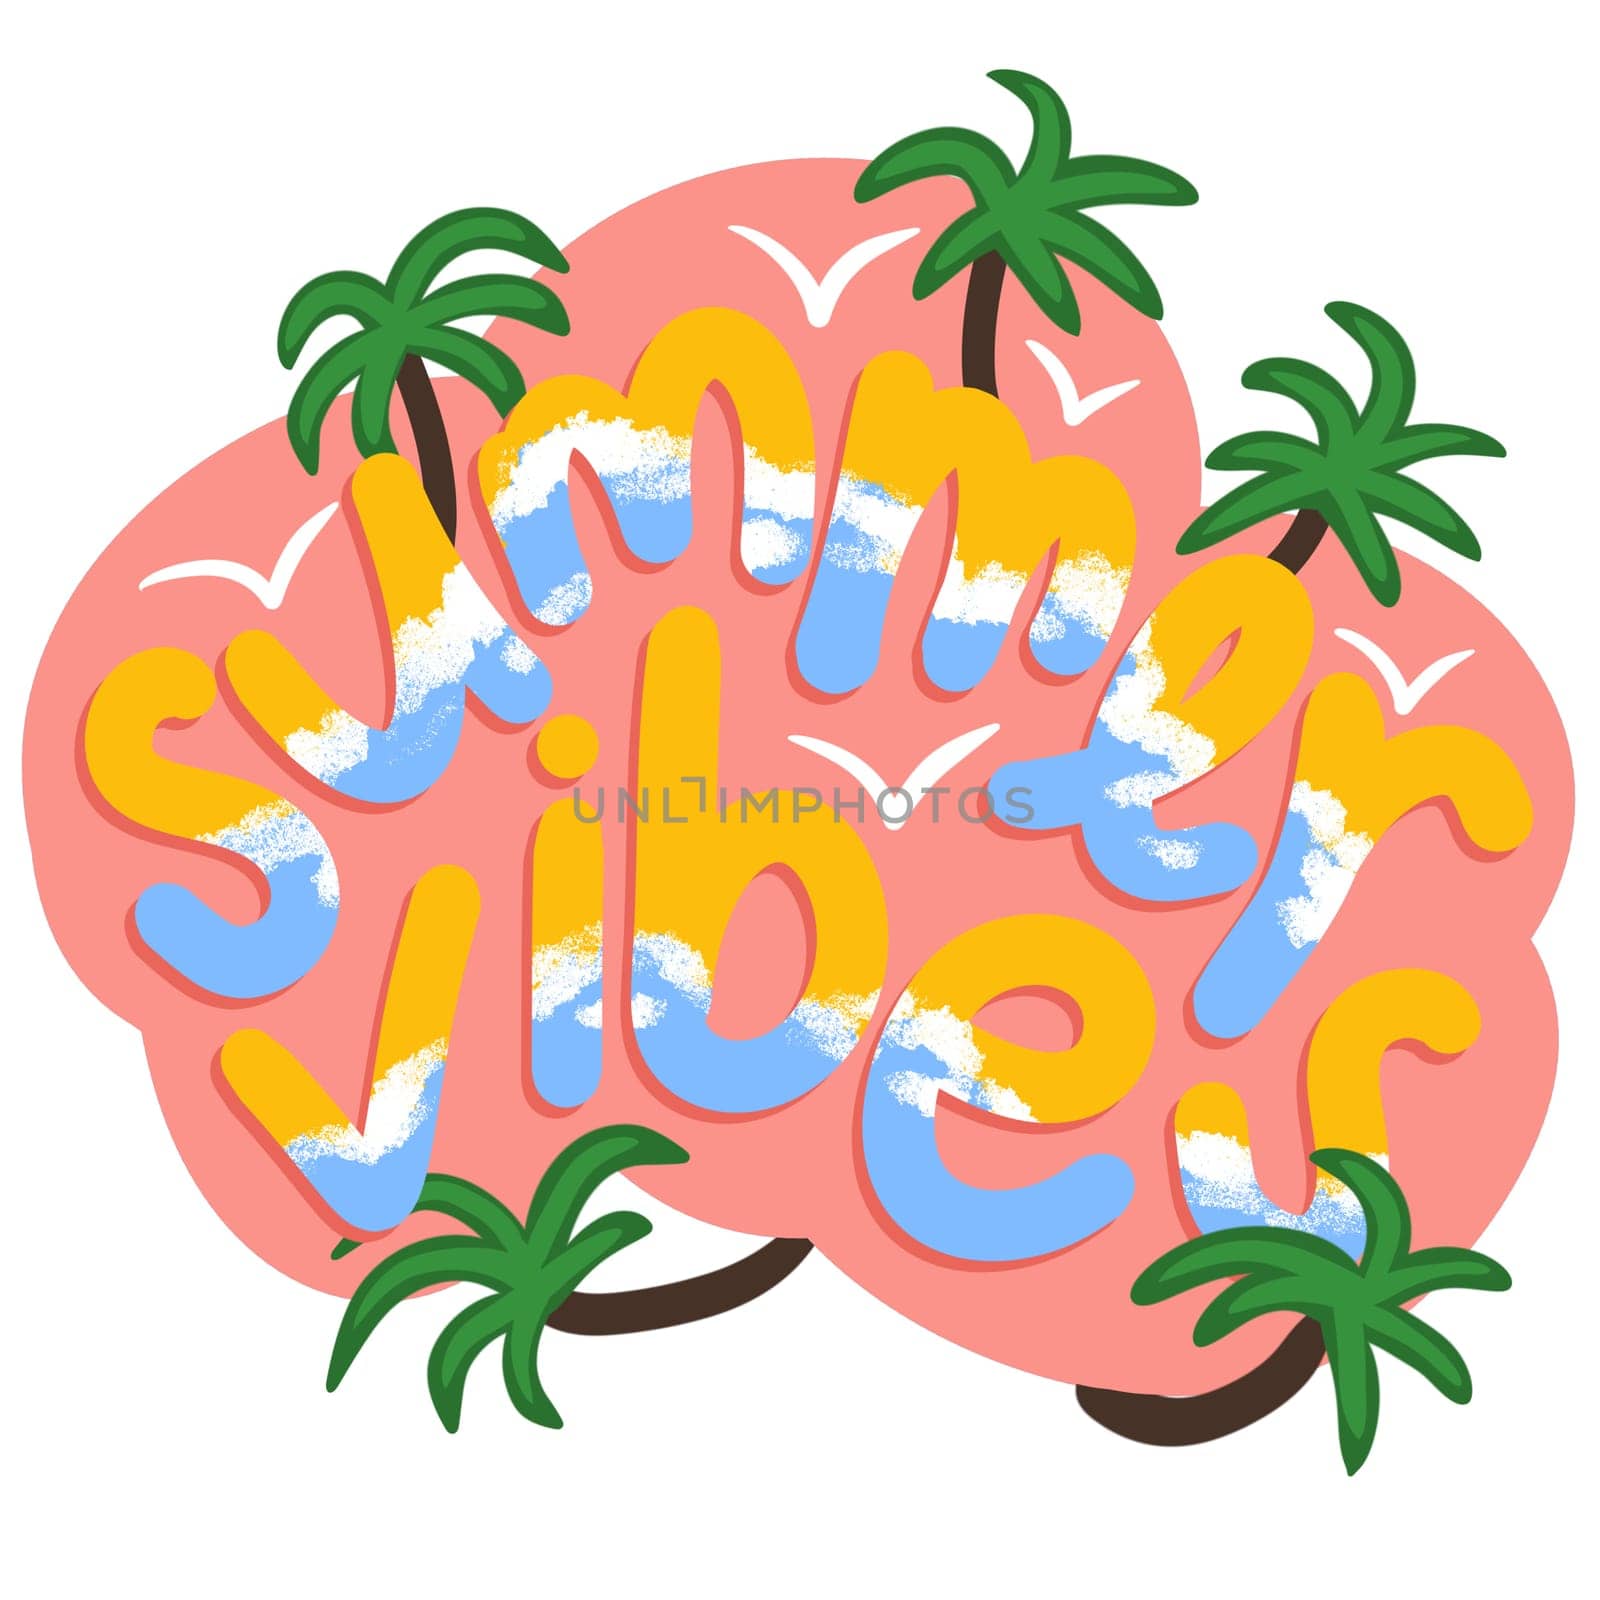 Summer vibes hand drawn illustration sticker. Sea ocean beach vacation holiday, peach palms tourism relax text words slogan lettering typography, bright colorful design. by Lagmar